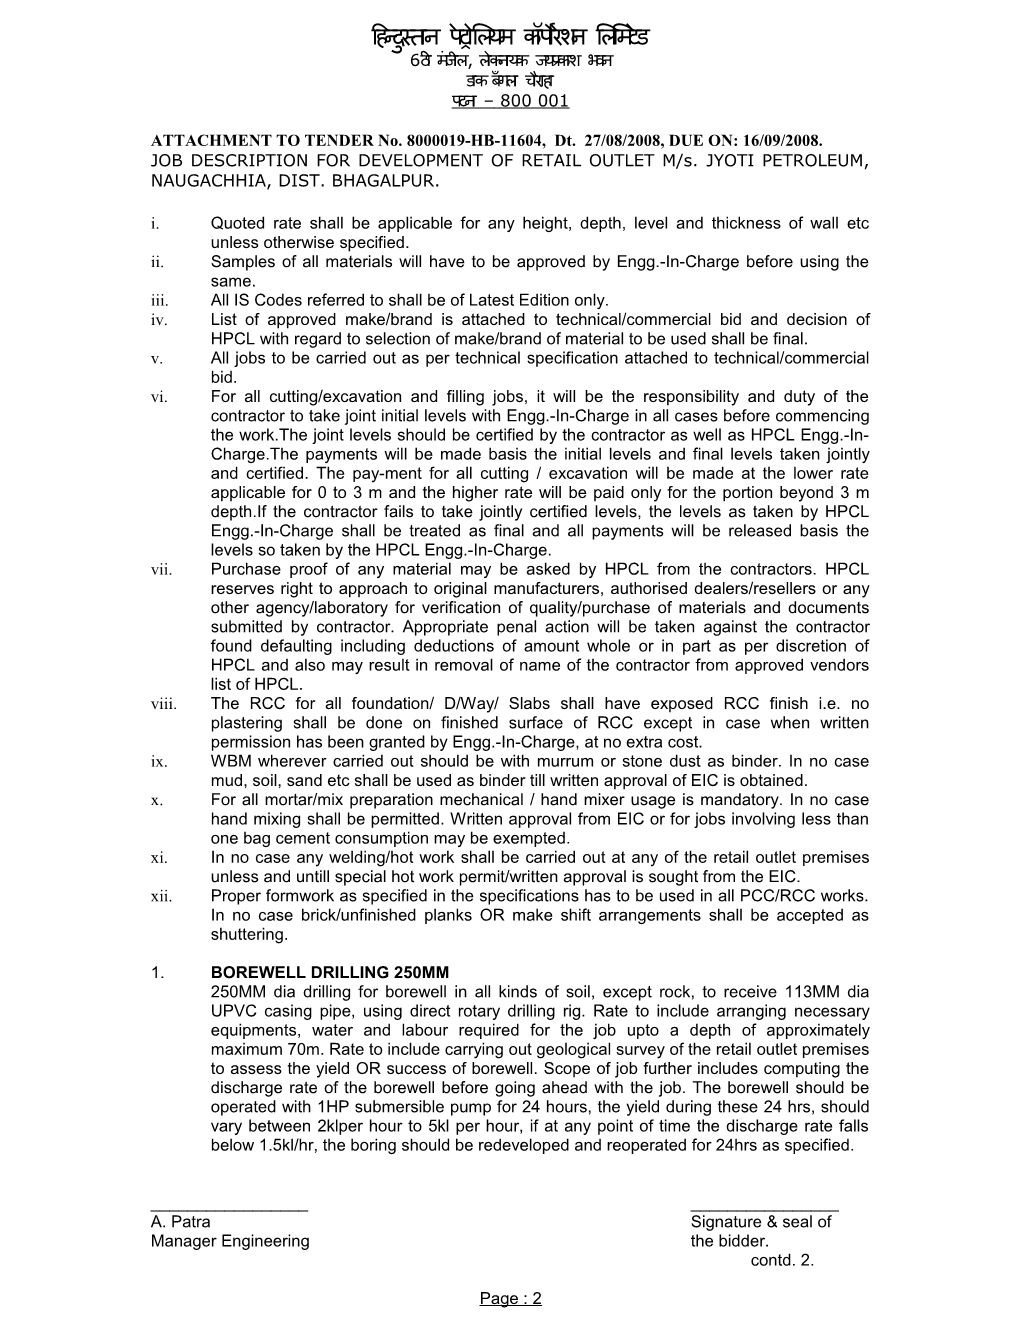 ATTACHMENT to TENDER No. 8000019-HB-11604, Dt. 27/08/2008, DUE ON: 16/09/2008